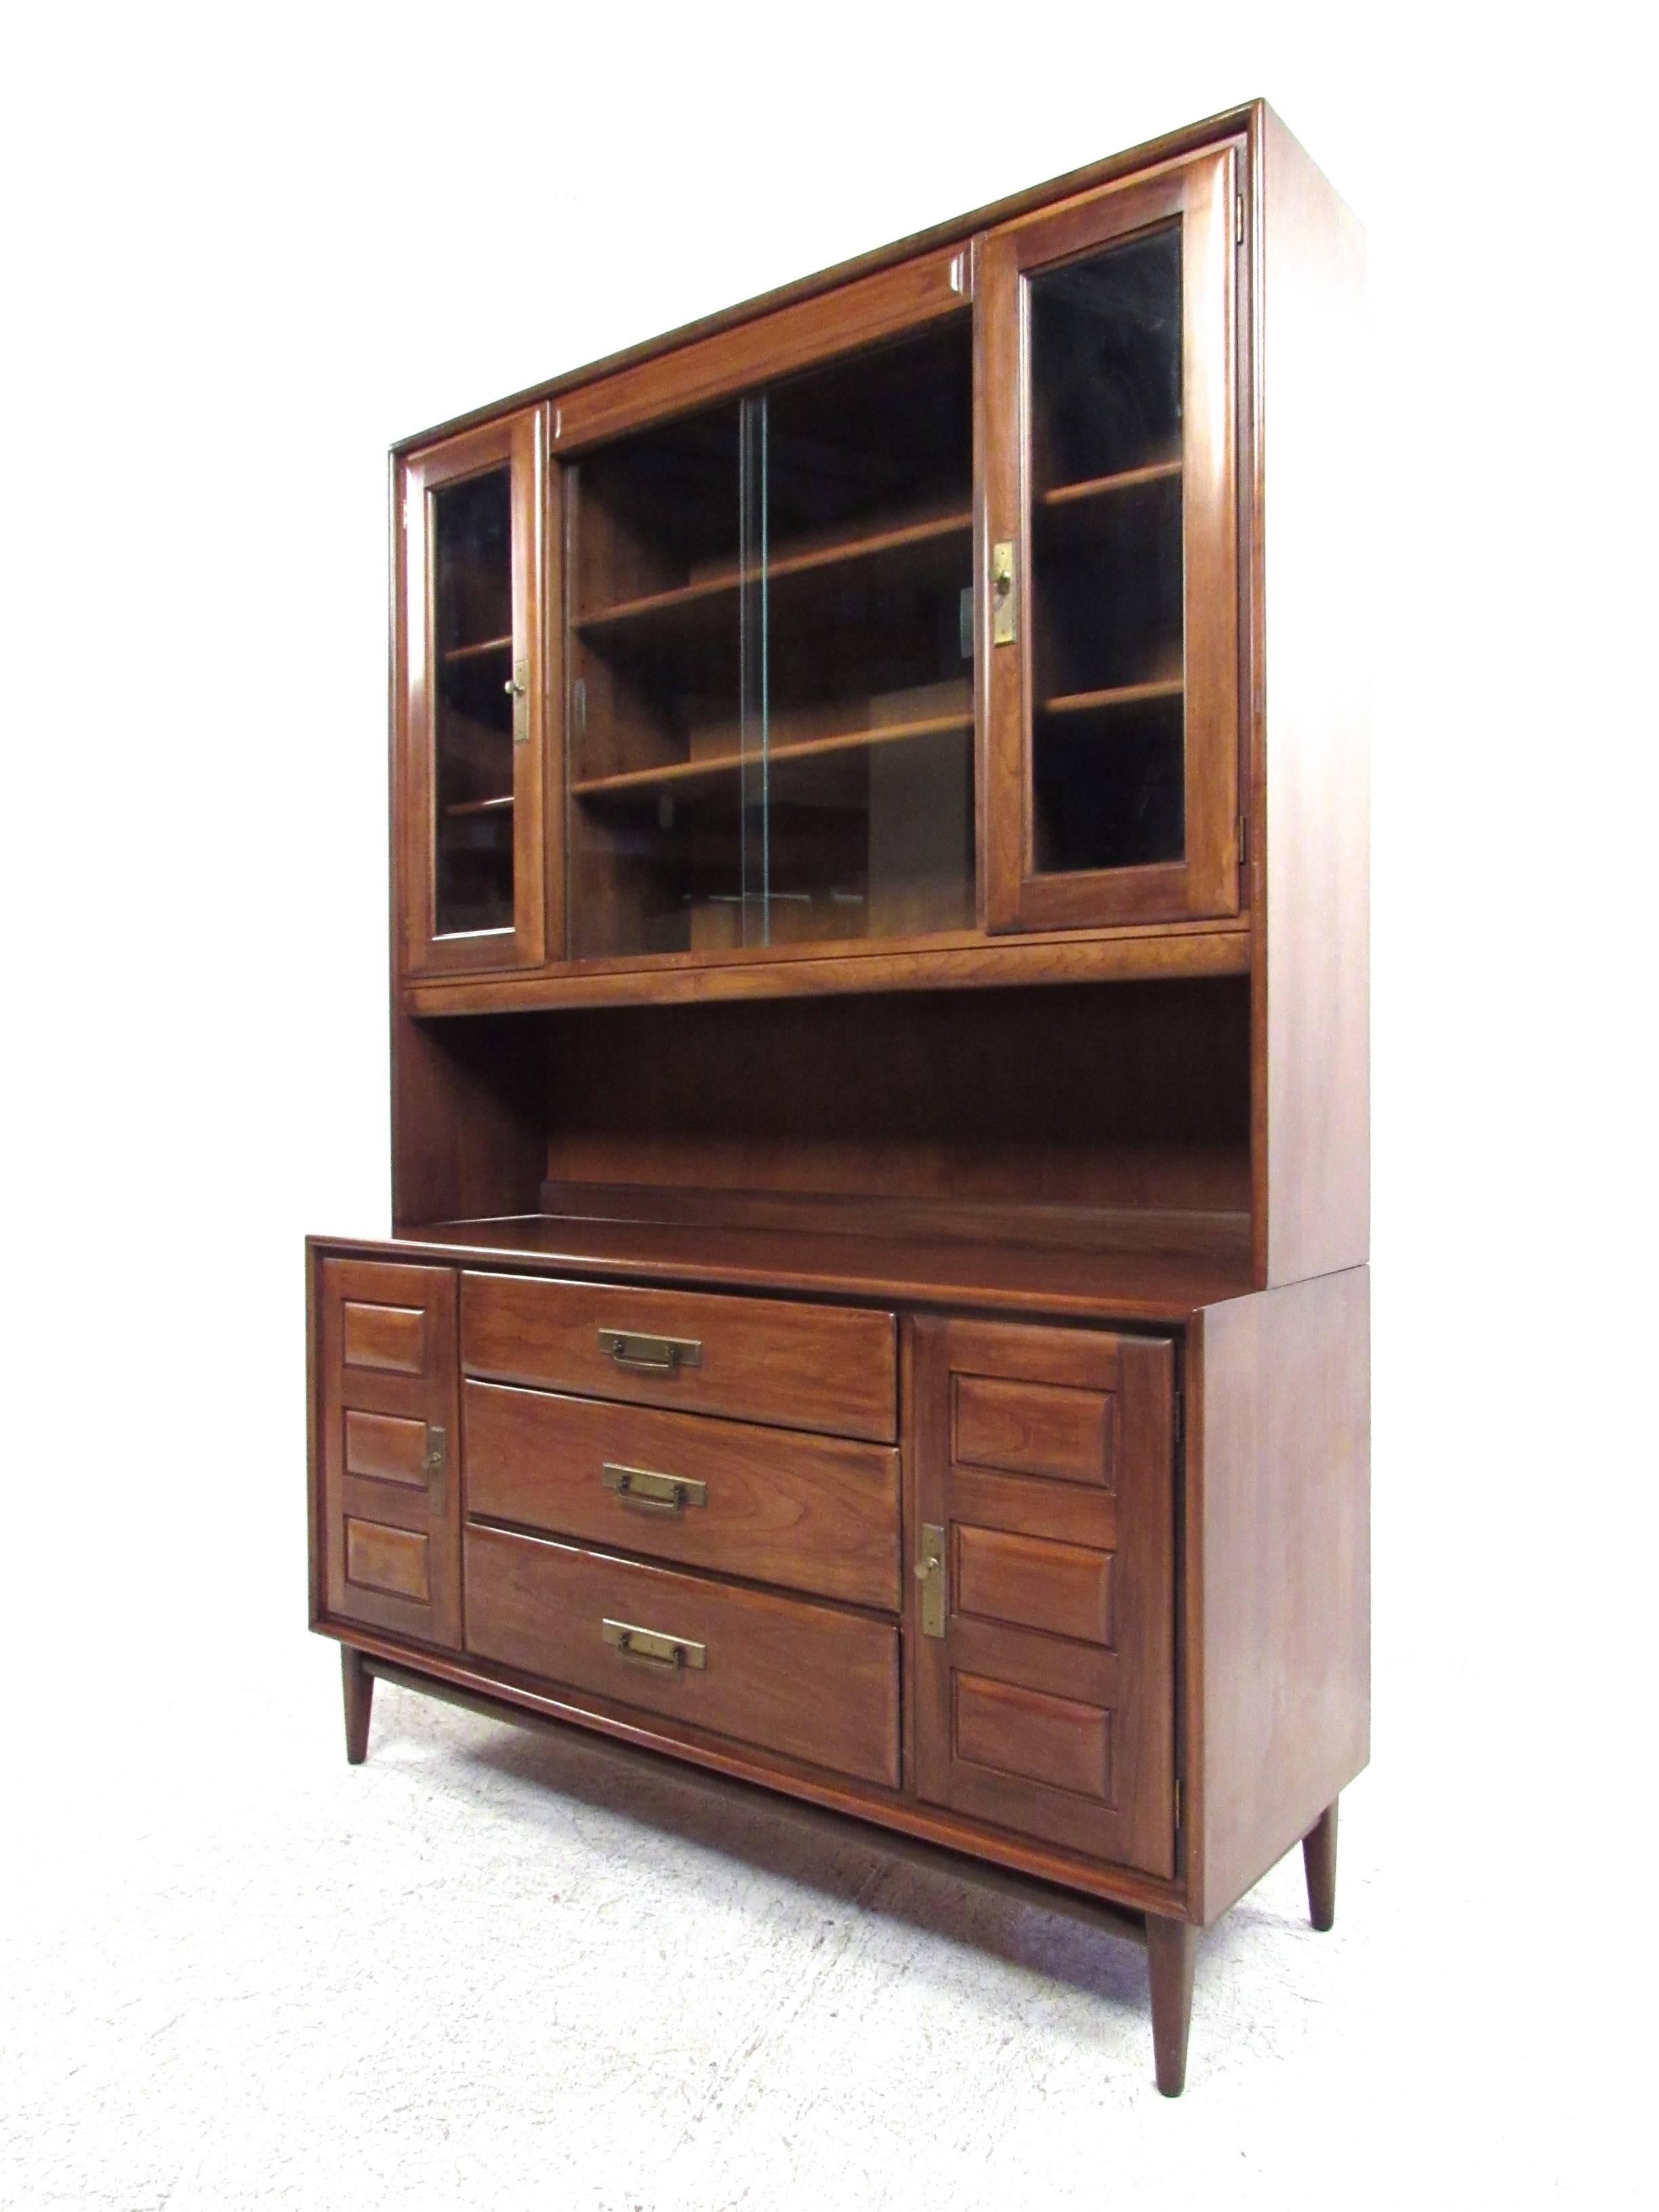 This beautiful vintage sideboard offers plenty of storage and display space with its matching display hutch. Brass trim, tapered legs and clean Mid-Century lines add to the vintage appeal of the piece. Matching dining room table, chairs and credenza